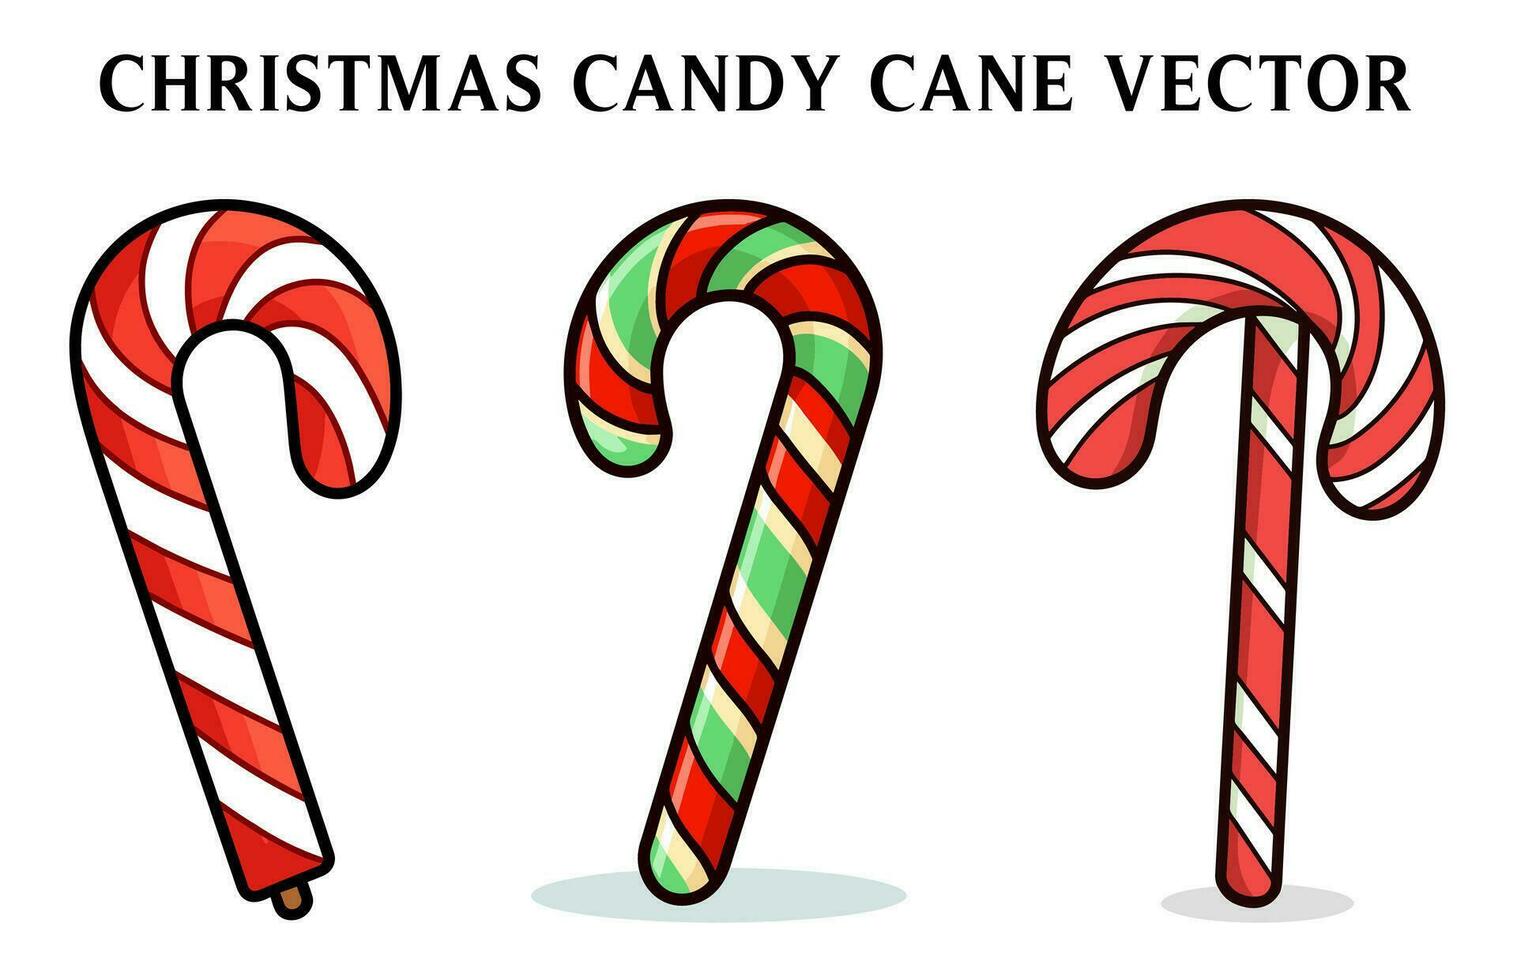 Christmas Candy Cane Clipart Bundle, Christmas Candy Cane Vector illustration